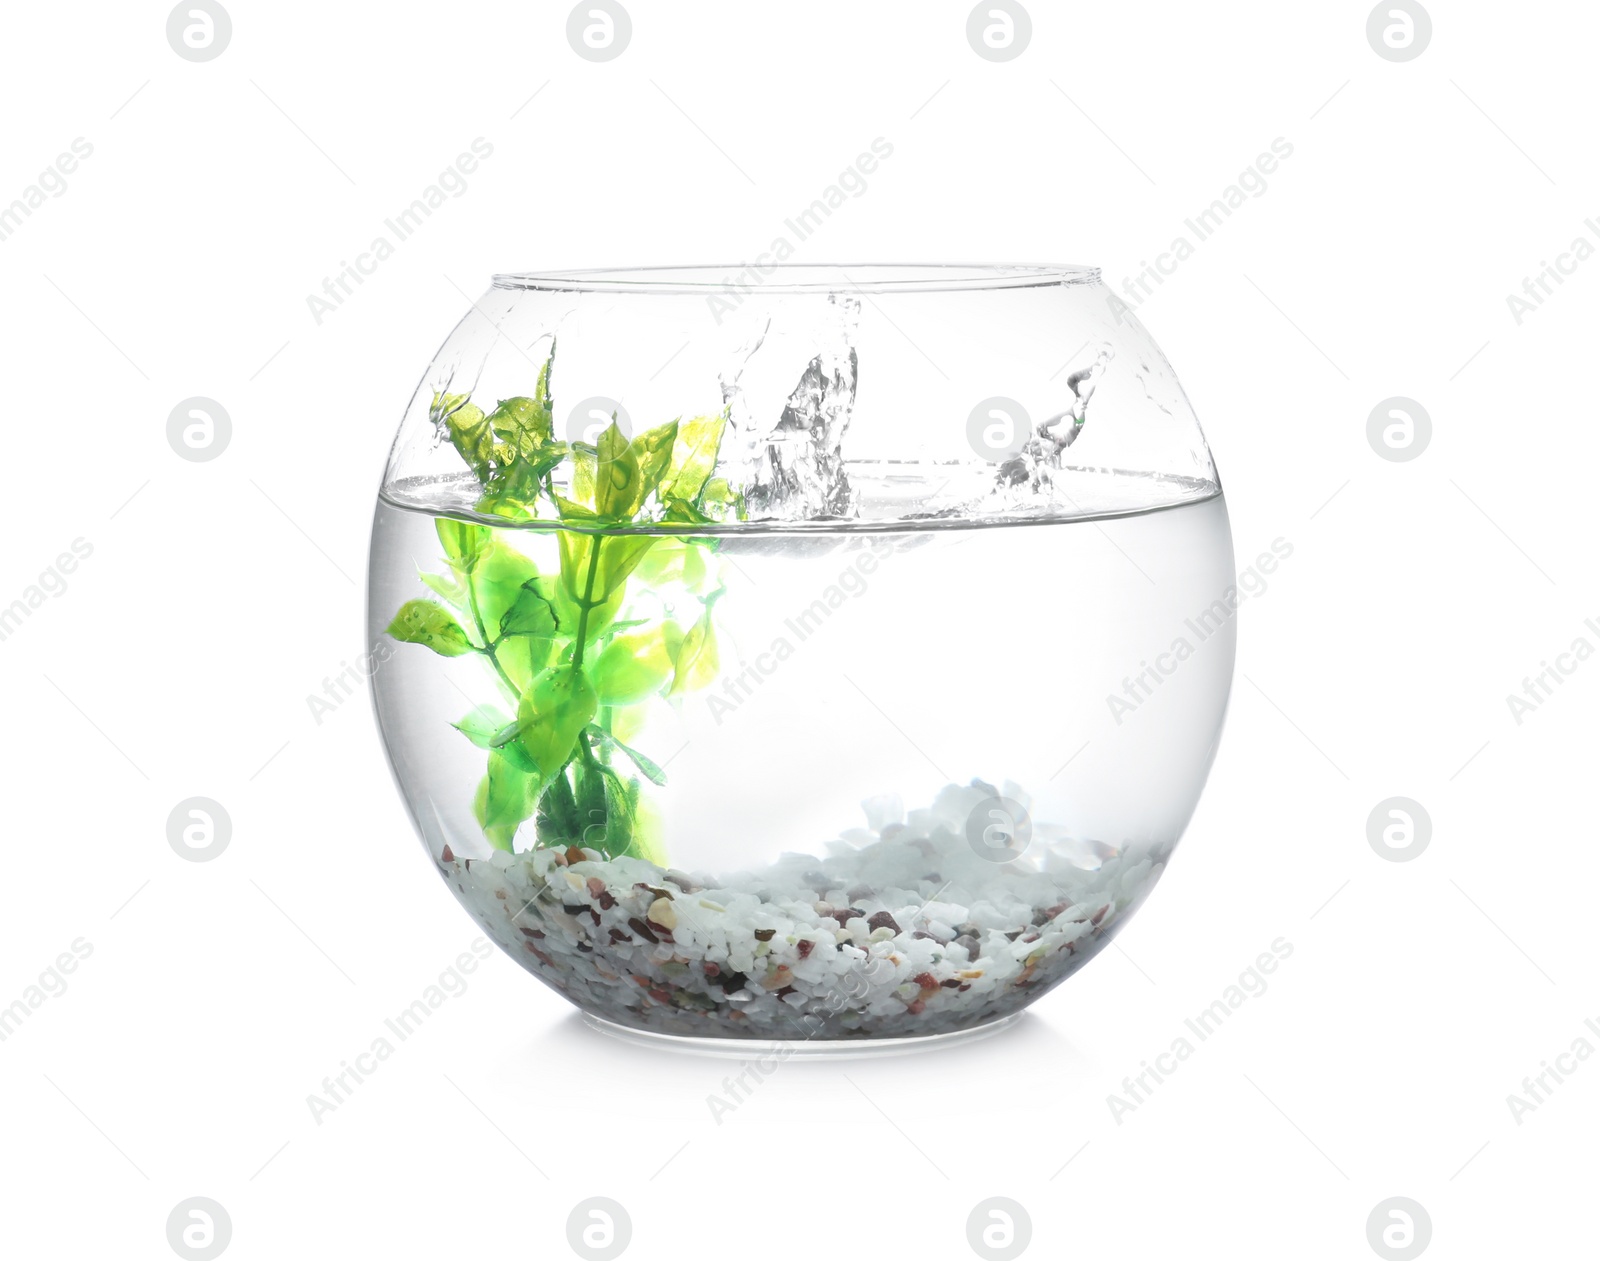 Photo of Splash of water in round fish bowl with decorative plant and pebbles on white background